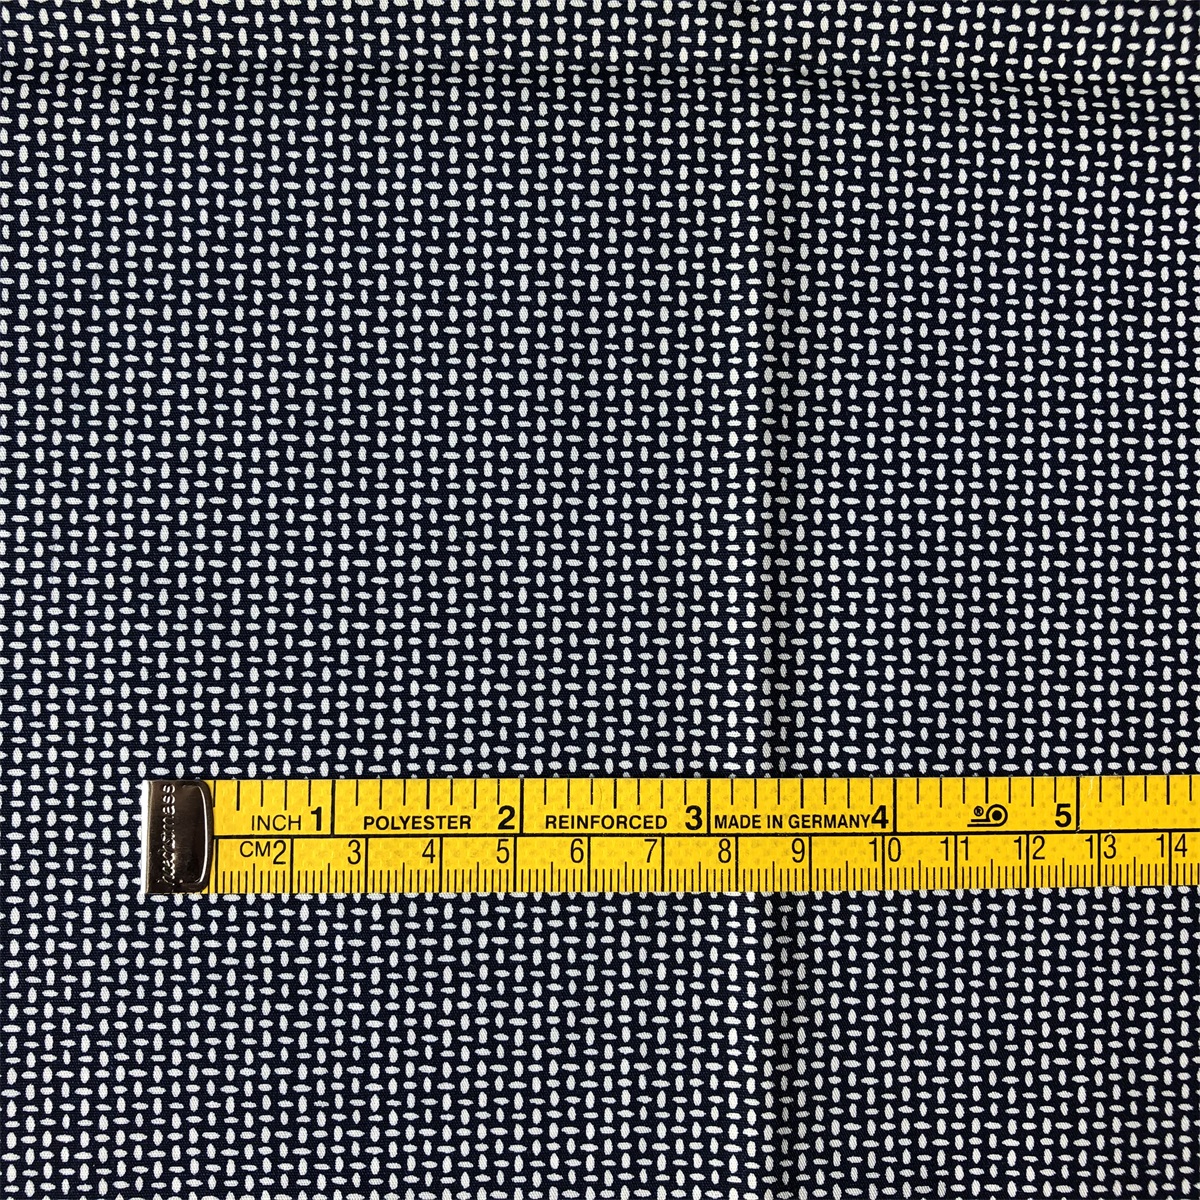 Sun-rising Textile Cotton Printed fabric high quality Eco-friendly 100% cotton poplin printed woven fabric for men's shirts